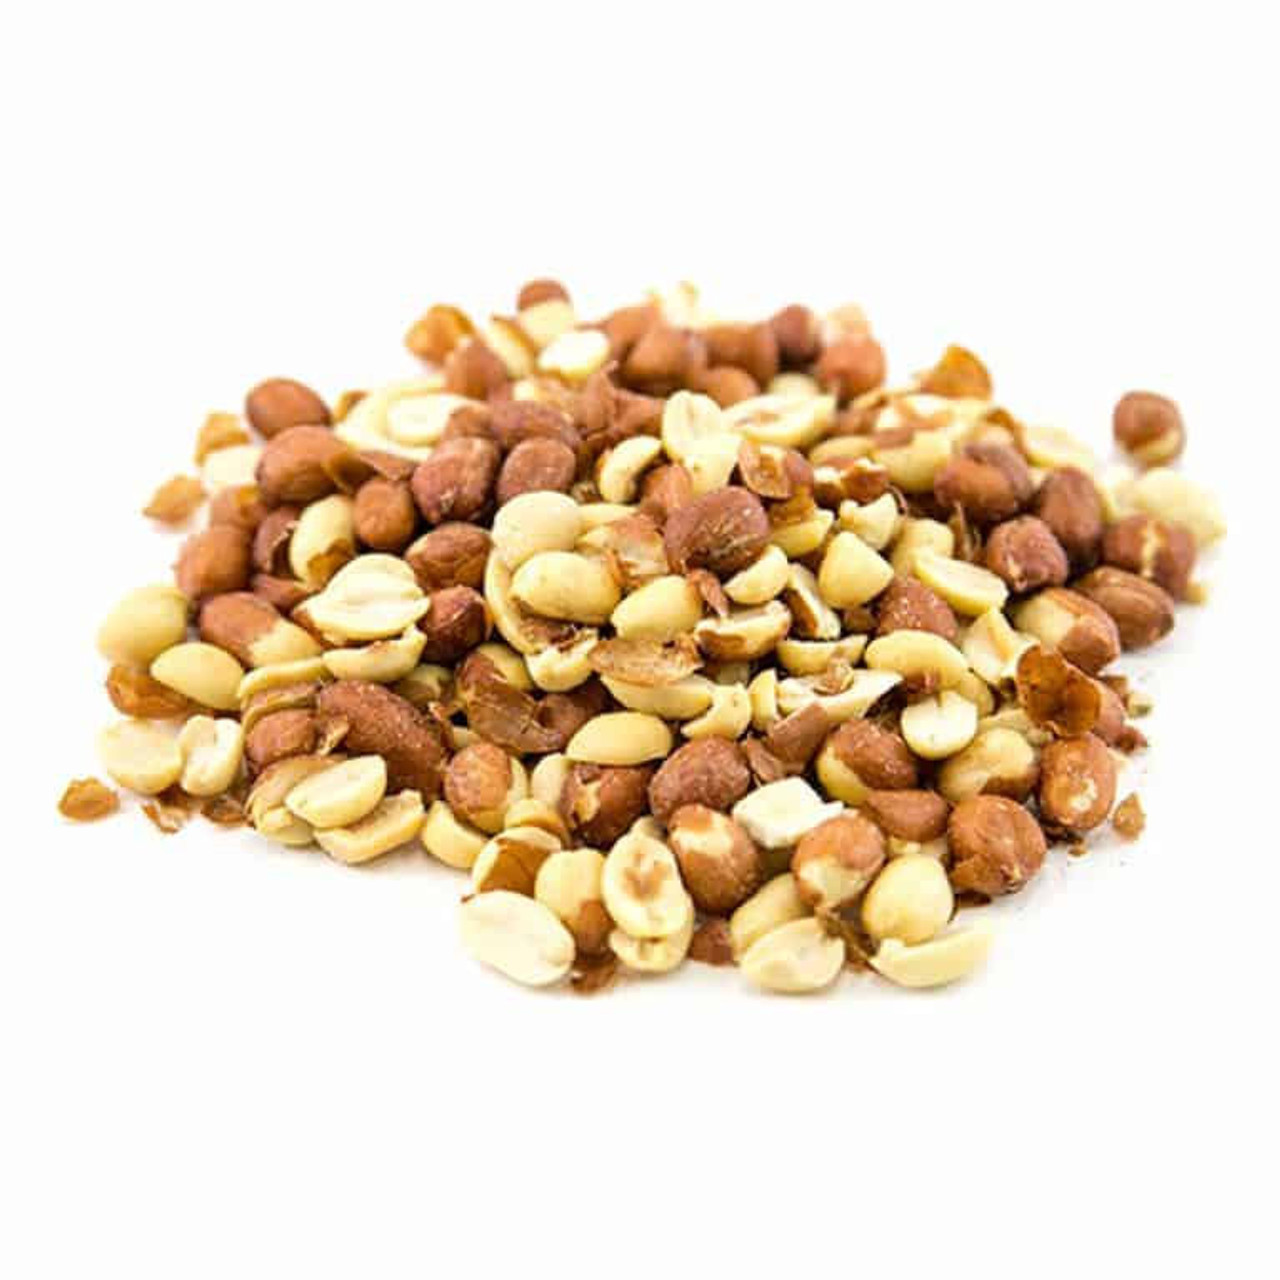 A2ZCHEF Roasted & Salted Peanuts (with skin) - 25lb Case 